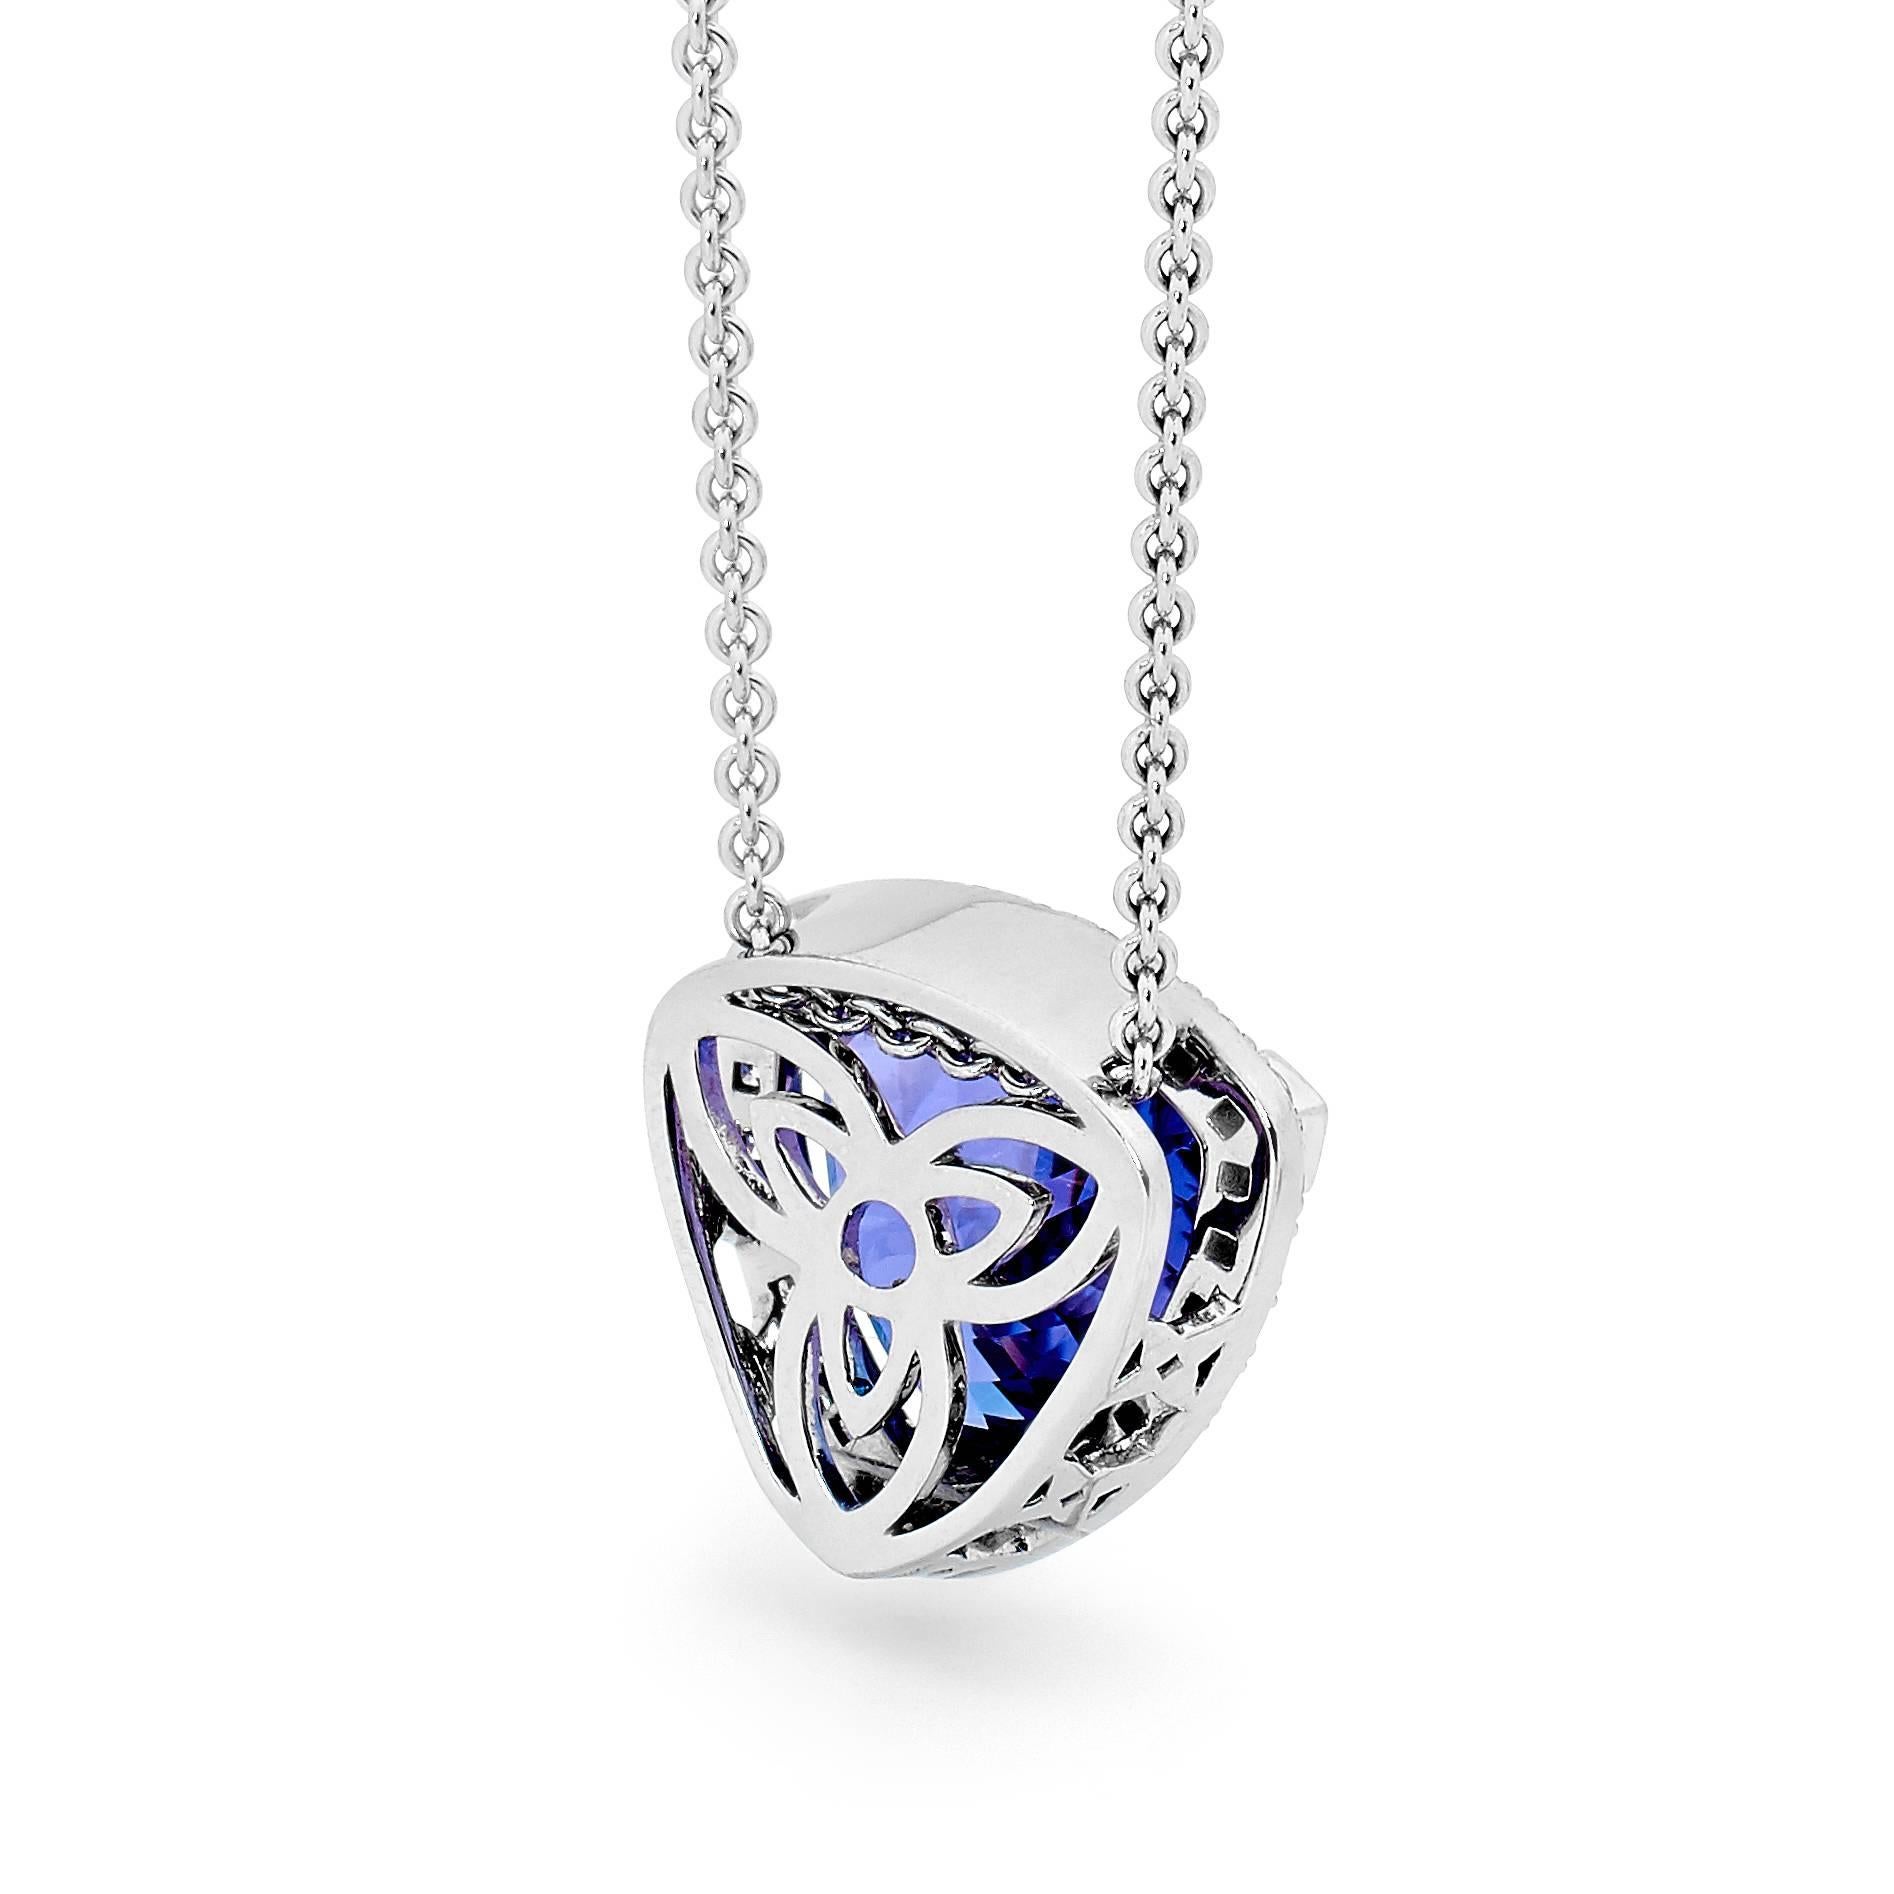 A classic beauty, our Trilliant Tanzanite and Diamonds Pendant showcases a rare, deep coloured 6.86ct Trilliant Cut Tanzanite, set in 18ct White Gold and delicately encased with a Halo of Fine White Diamonds (totaling 0.39CT H/SI). The pendant sits